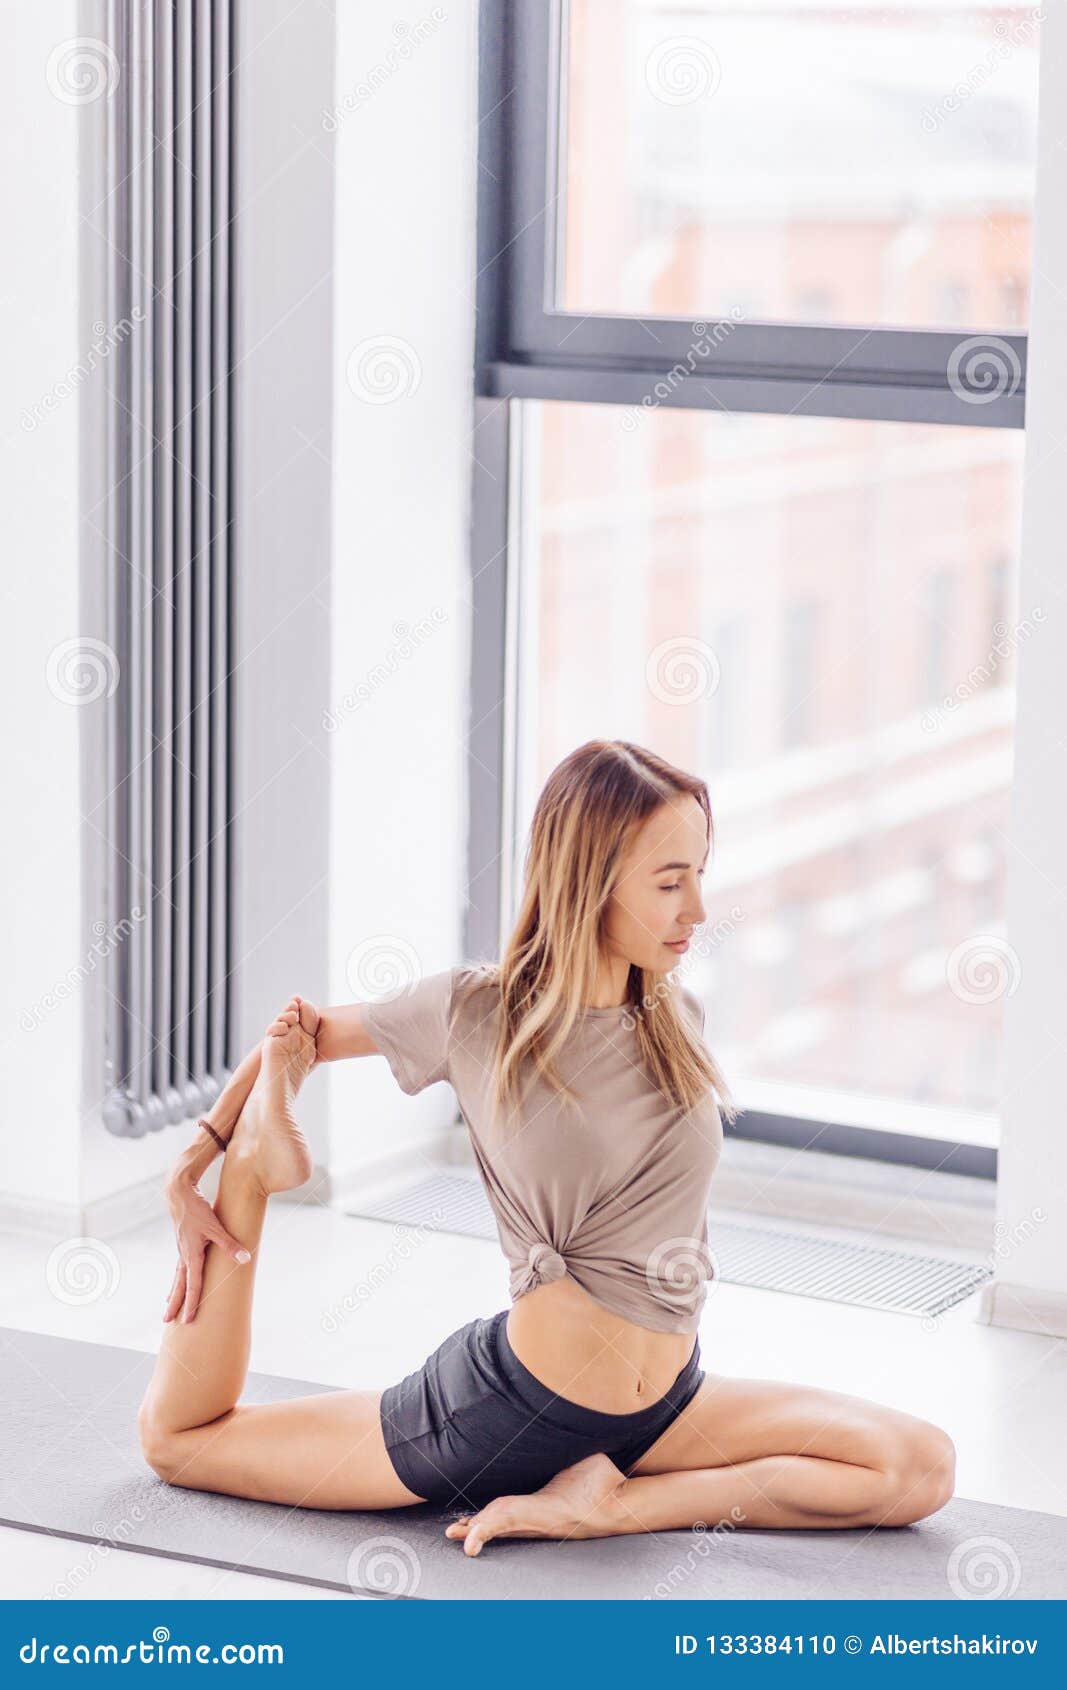 https://thumbs.dreamstime.com/z/how-to-get-flexible-legs-extreme-yoga-how-to-get-flexible-legs-feeling-flexible-extreme-yoga-side-view-full-length-photo-133384110.jpg